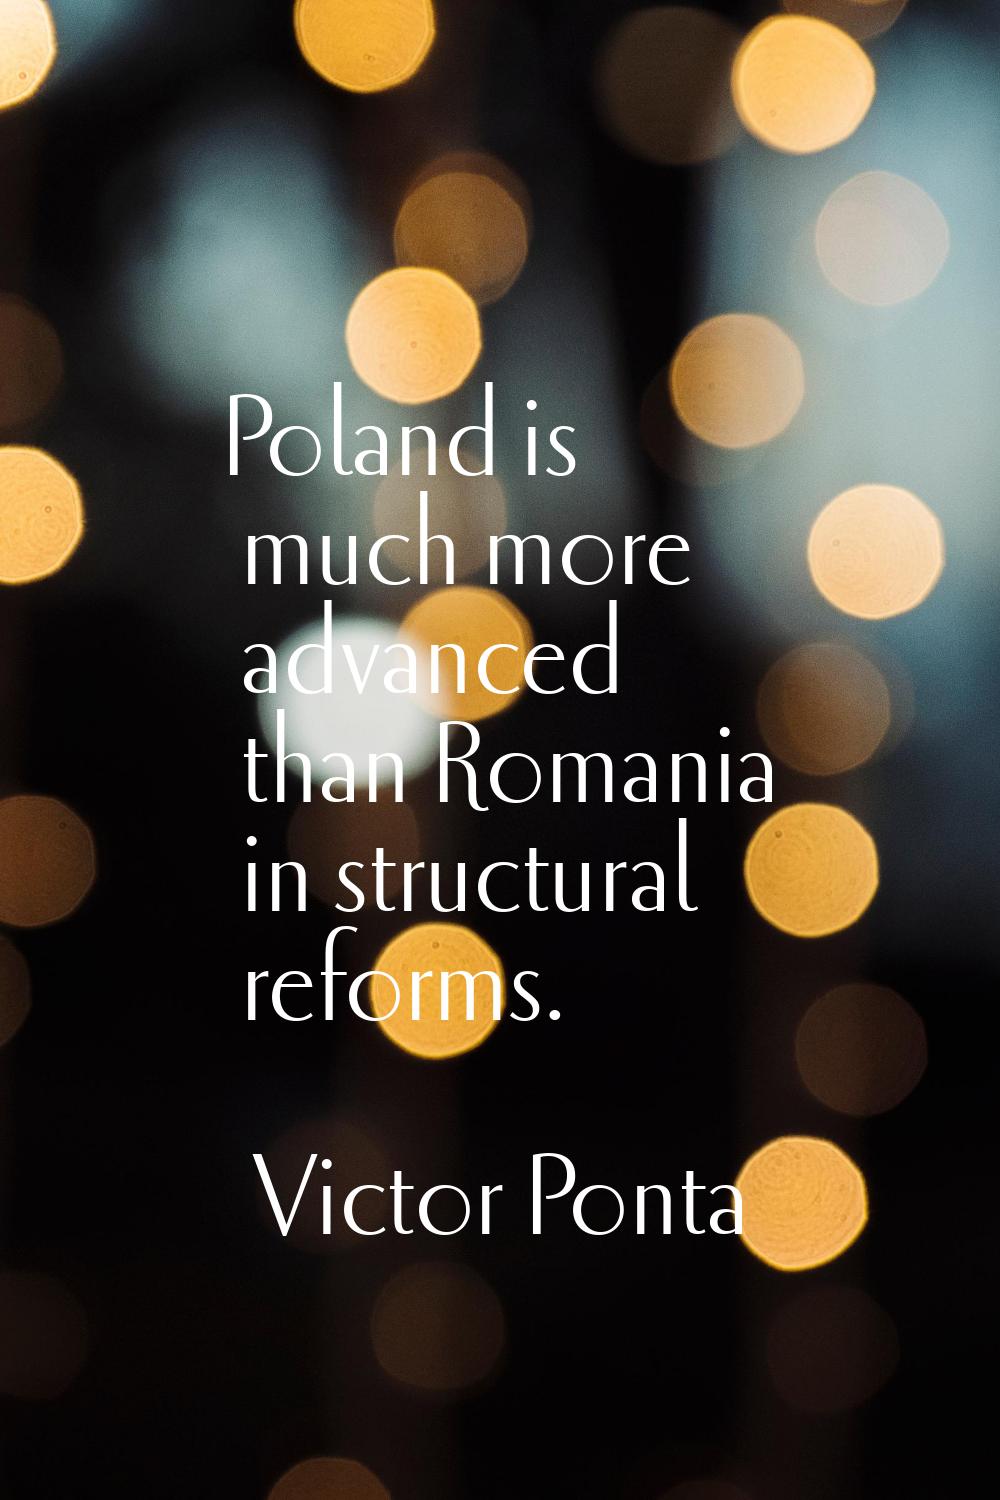 Poland is much more advanced than Romania in structural reforms.